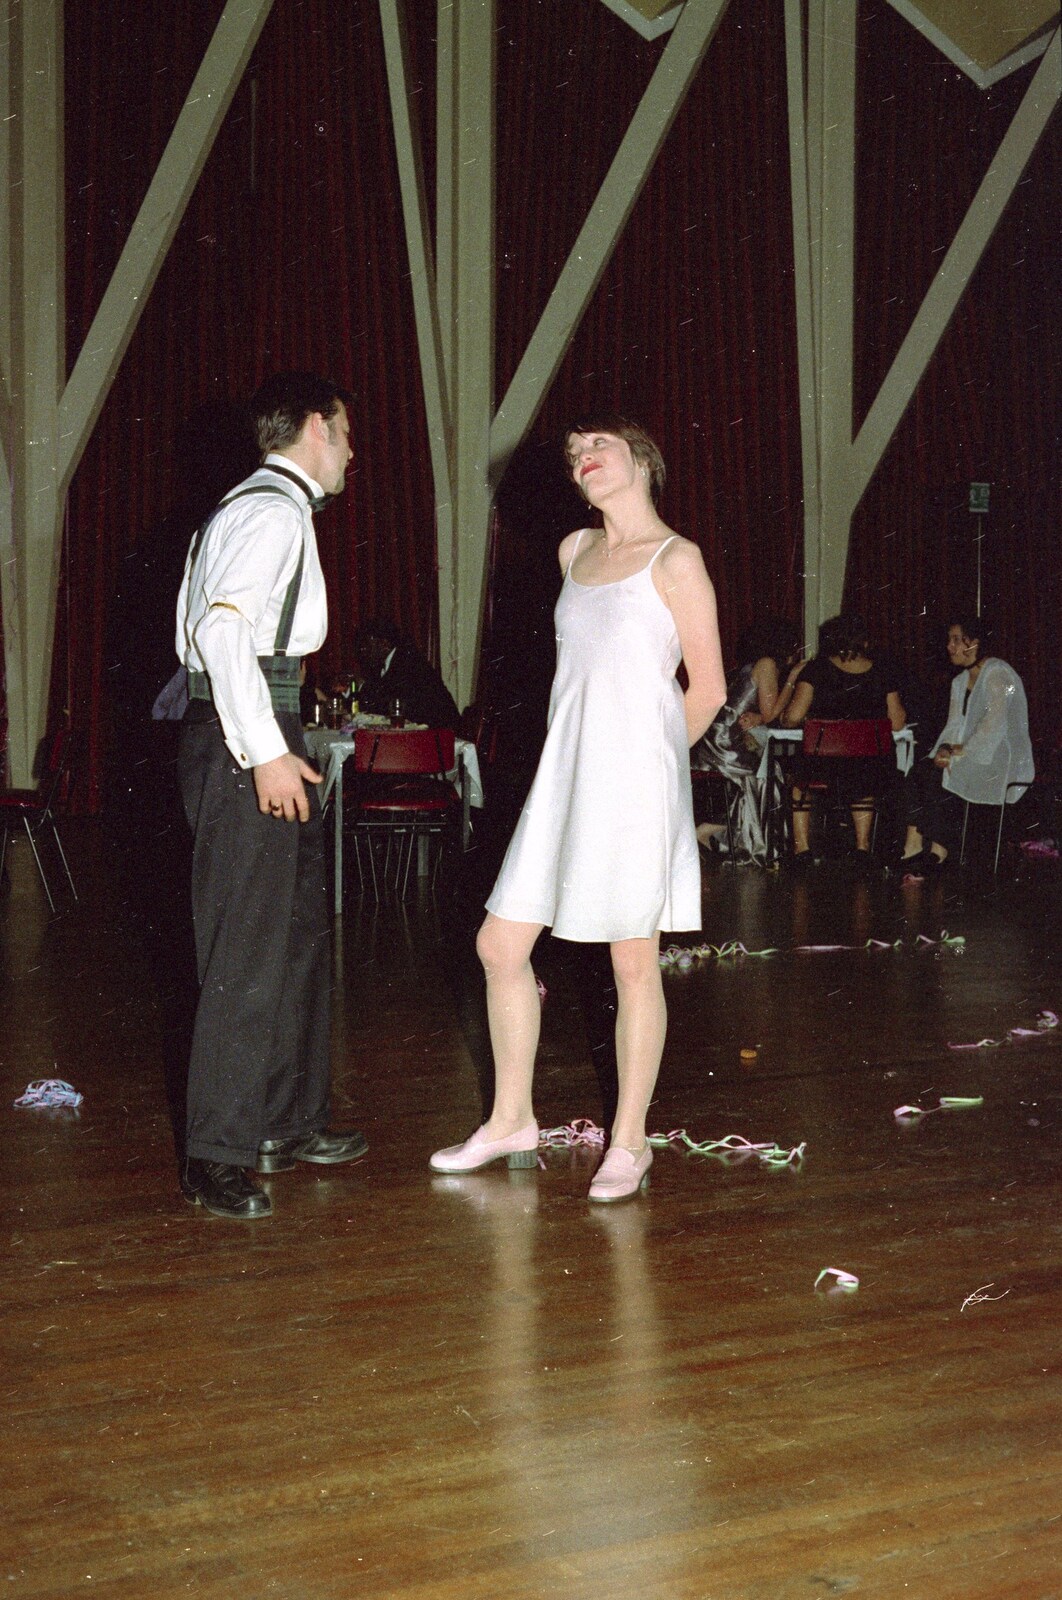 Trev and ? face off from CISU at the Suffolk College May Ball, Ipswich, Suffolk - 11th May 1997